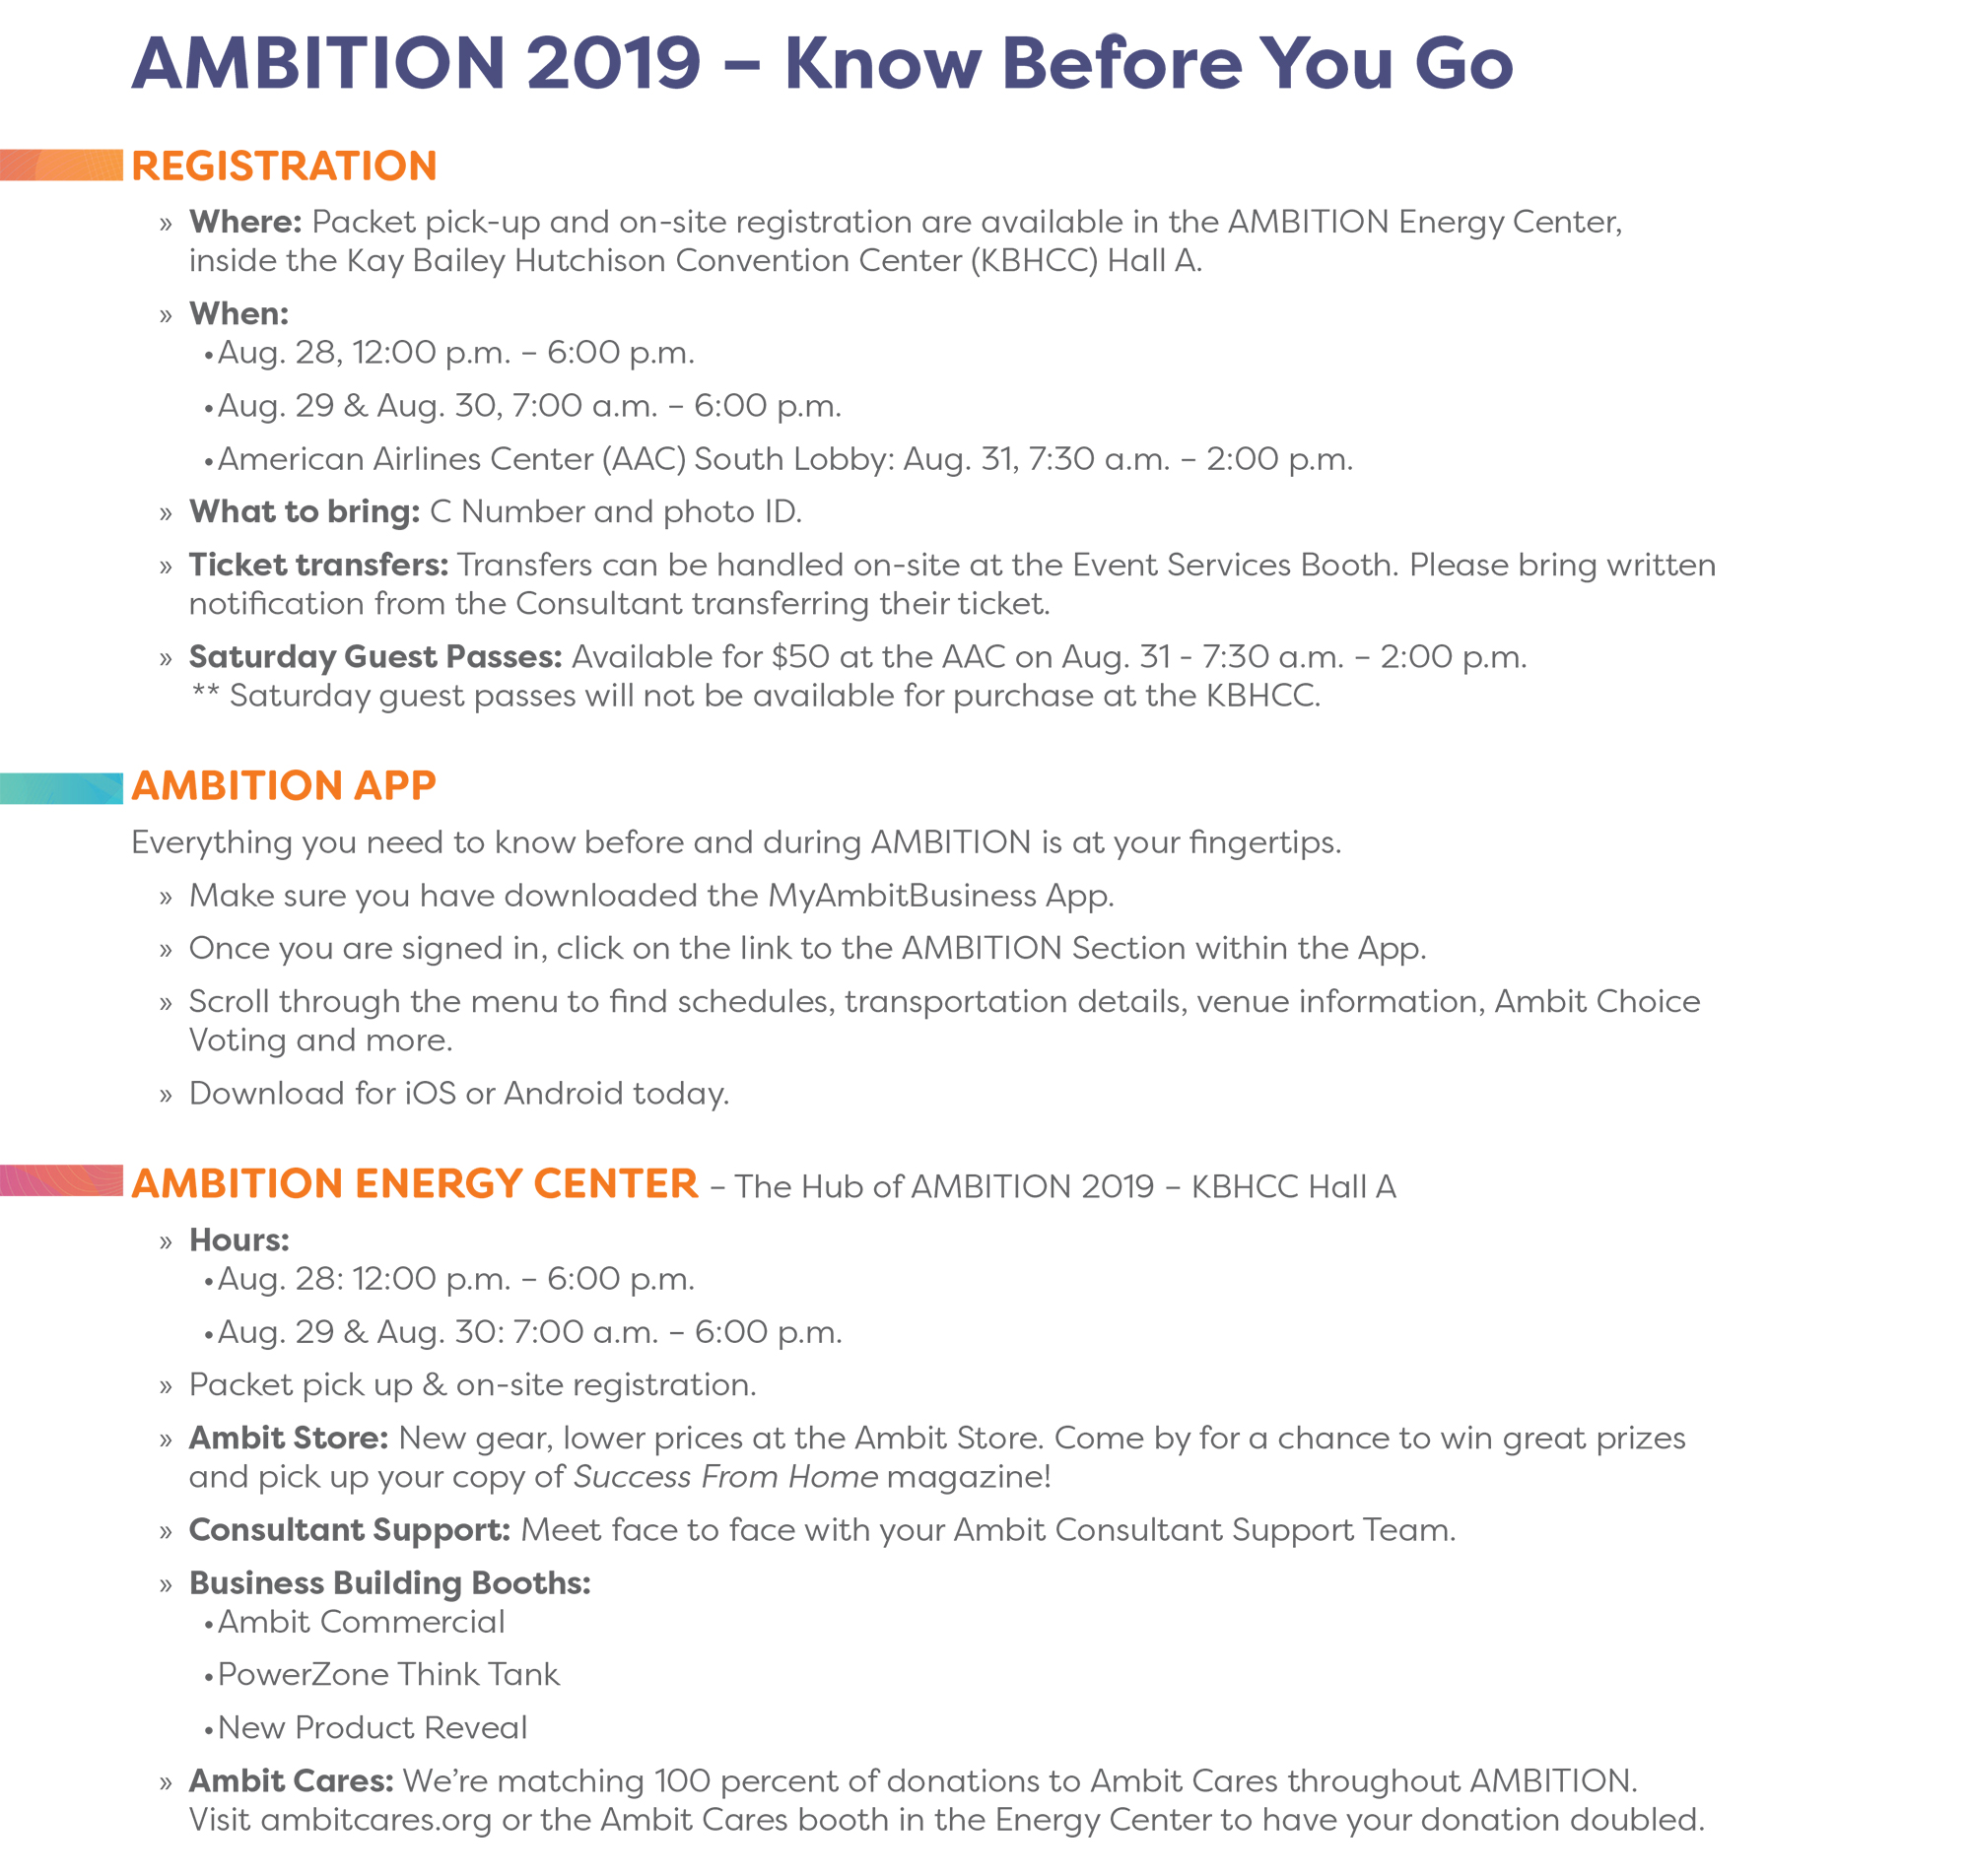 AMBITION 2019 know before you go